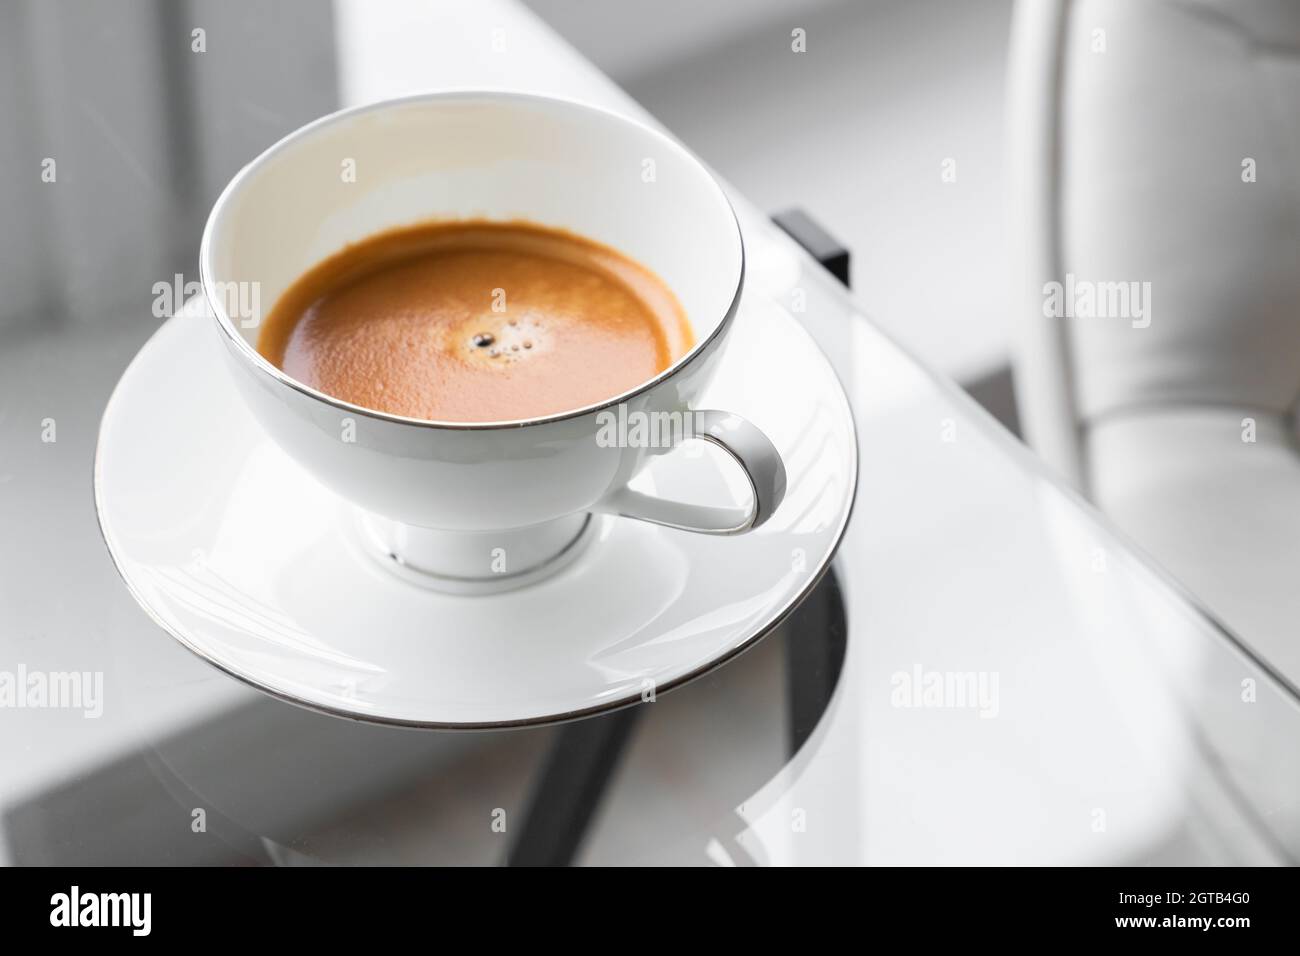 https://c8.alamy.com/comp/2GTB4G0/espresso-coffee-in-a-white-cup-stands-on-a-glass-table-closeup-photo-with-selective-focus-2GTB4G0.jpg